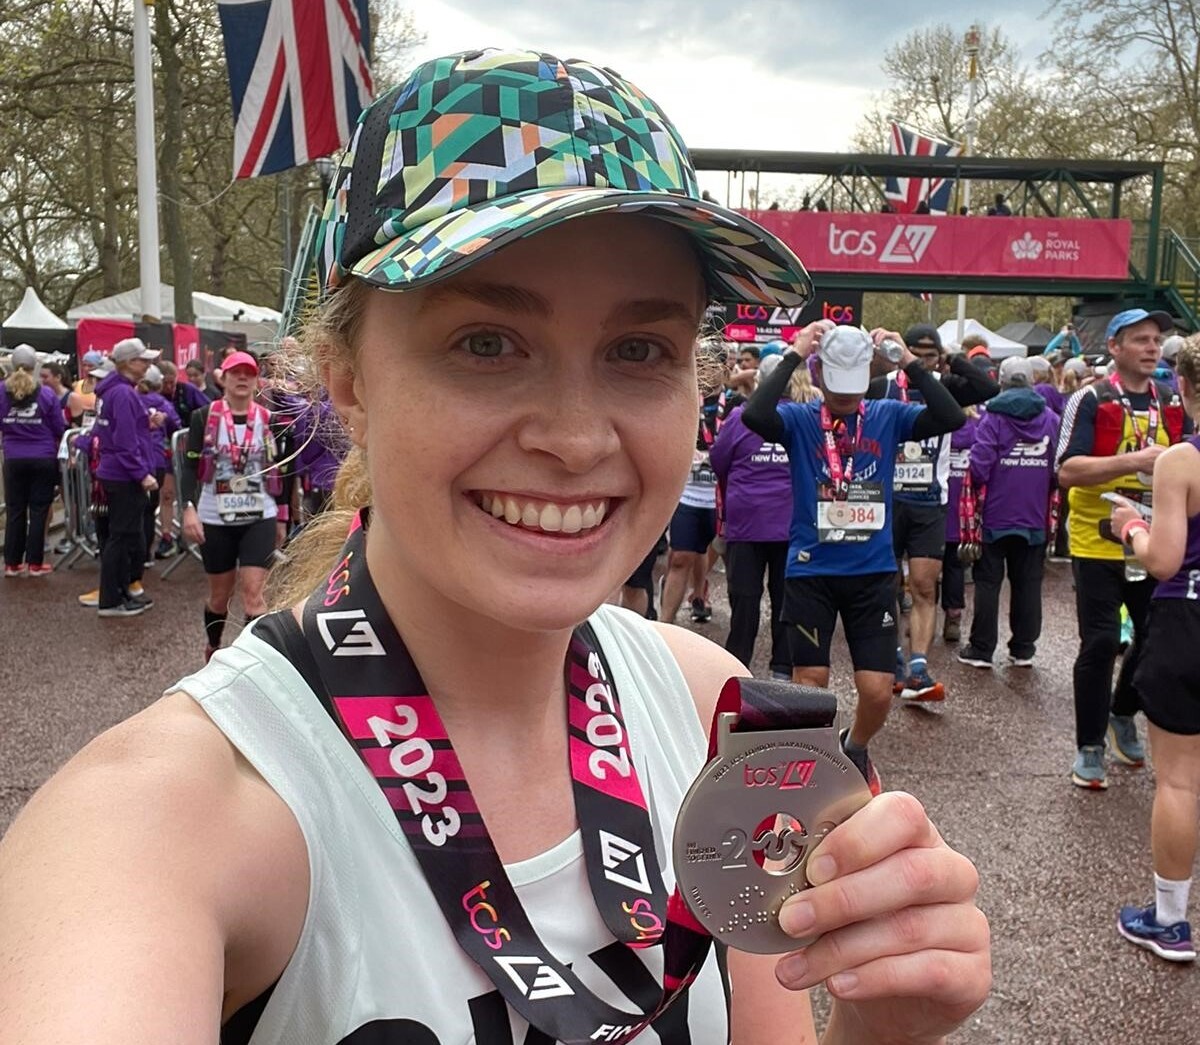 Skye pictured after finishing the London Marathon. She is wearing a white running vest, green patterned baseball cap and her London Marathon medal. She is smiling.